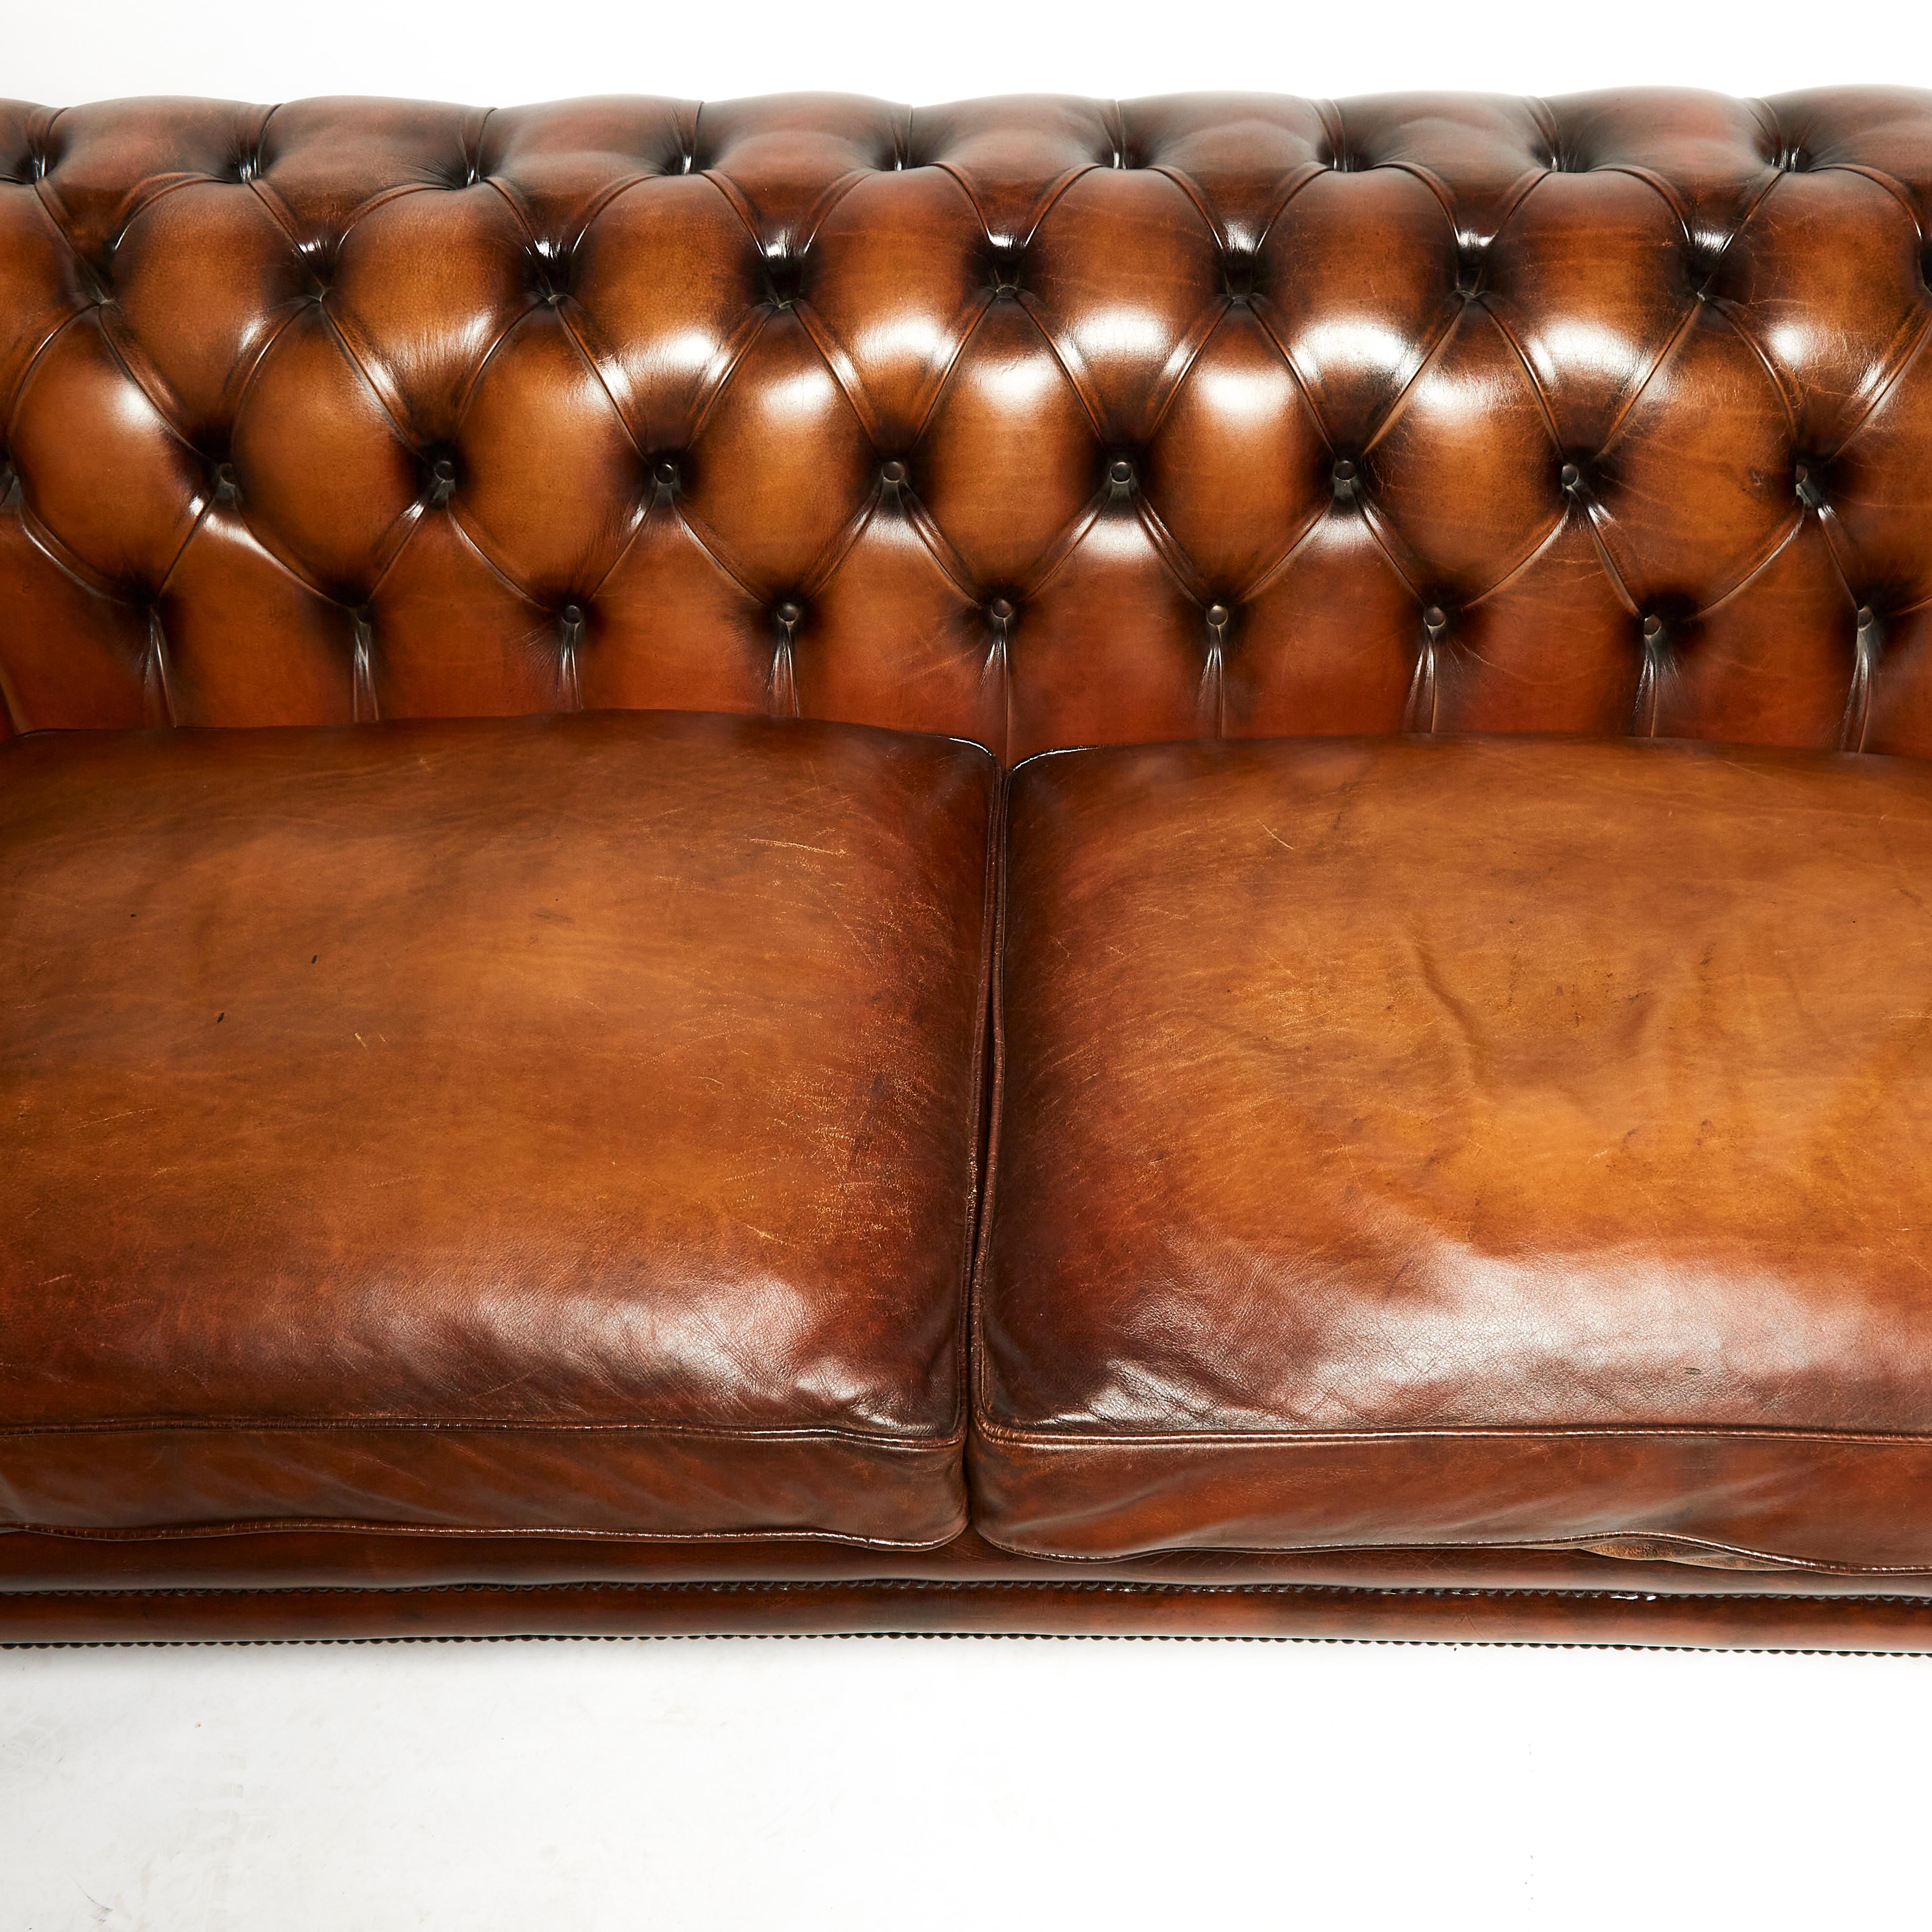 This very good looking and extremely comfortable English chesterfield sofa is made in the traditional 19th century style, standing on front turned and swept back legs. The sofa features 2 separate seat cushions with a generously sized rollback arms